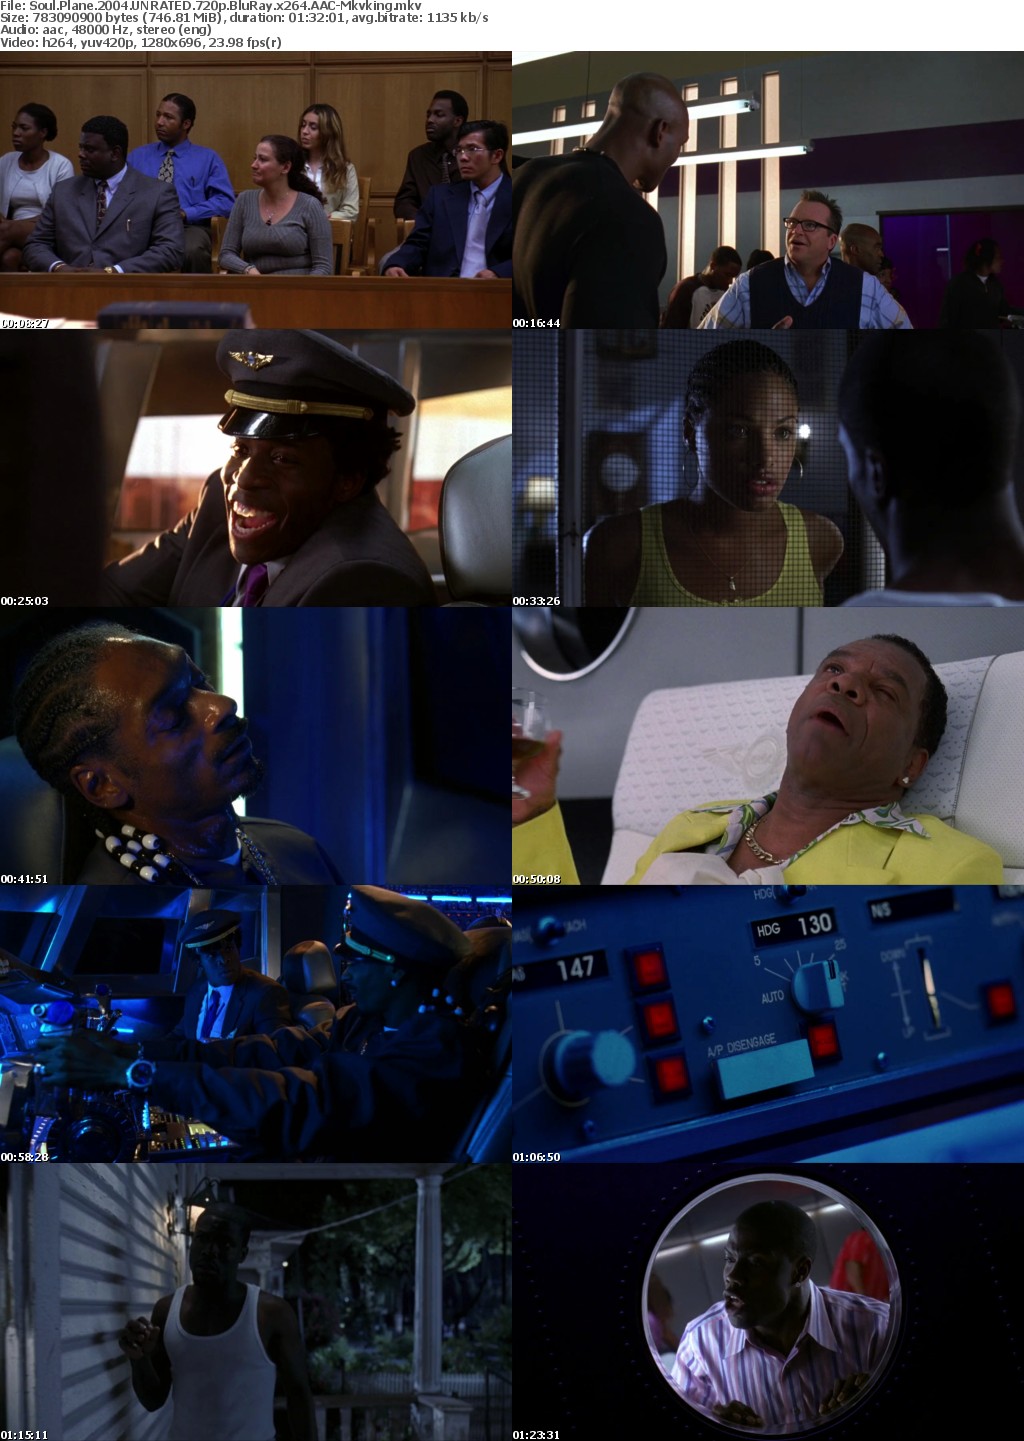 Soul Plane 2004 UNRATED 720p BluRay x264 AAC-Mkvking